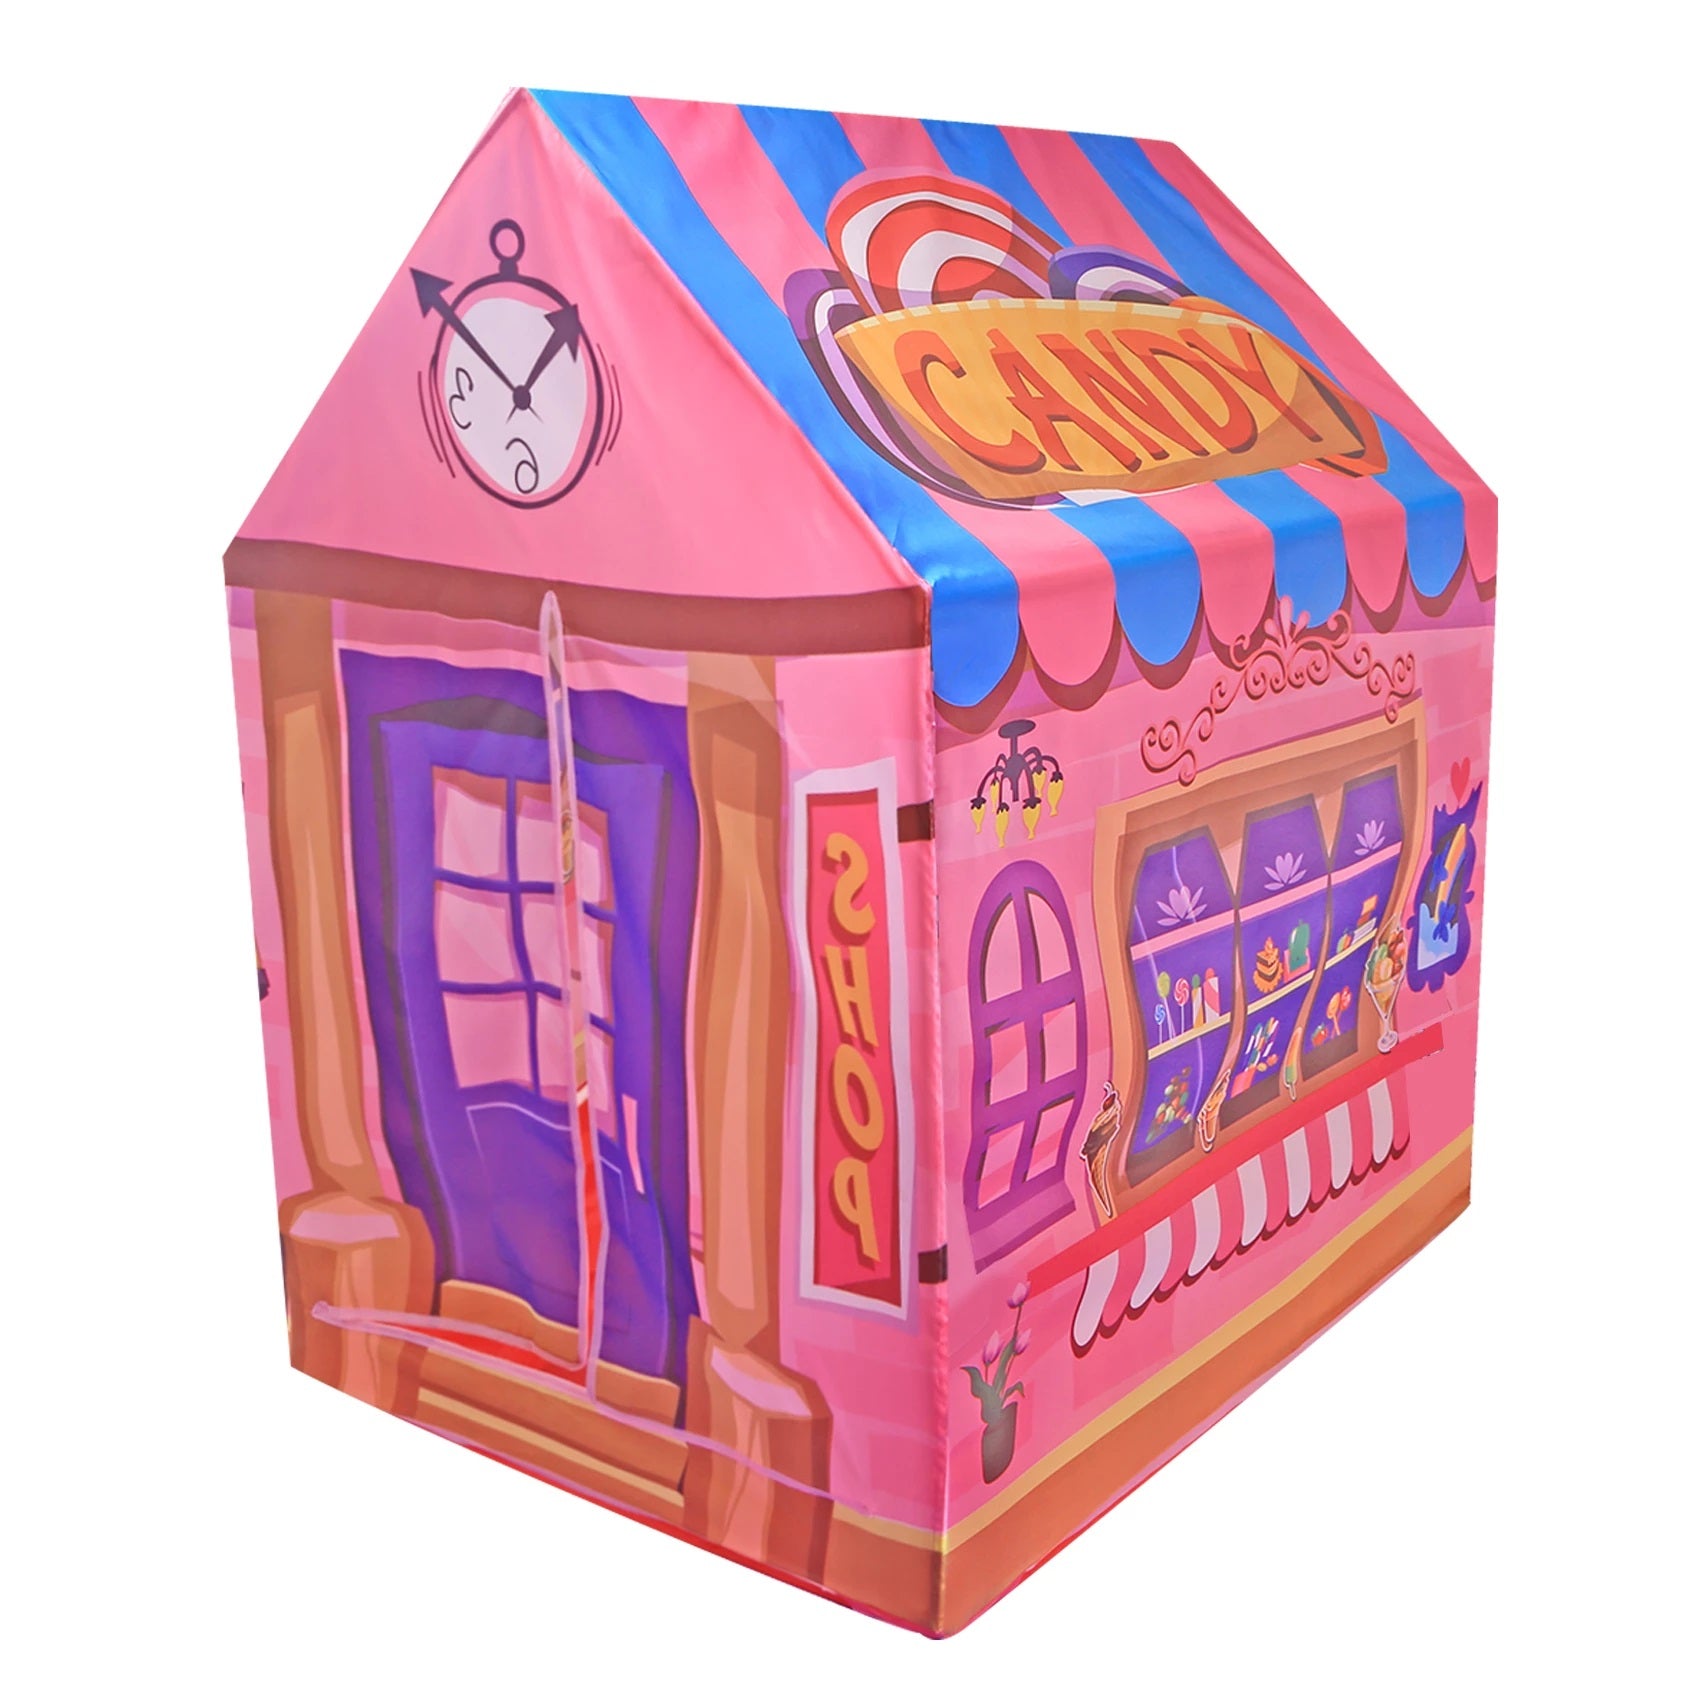 Playtime Foldable Tent House Candy Shop - Pink - Baby Moo